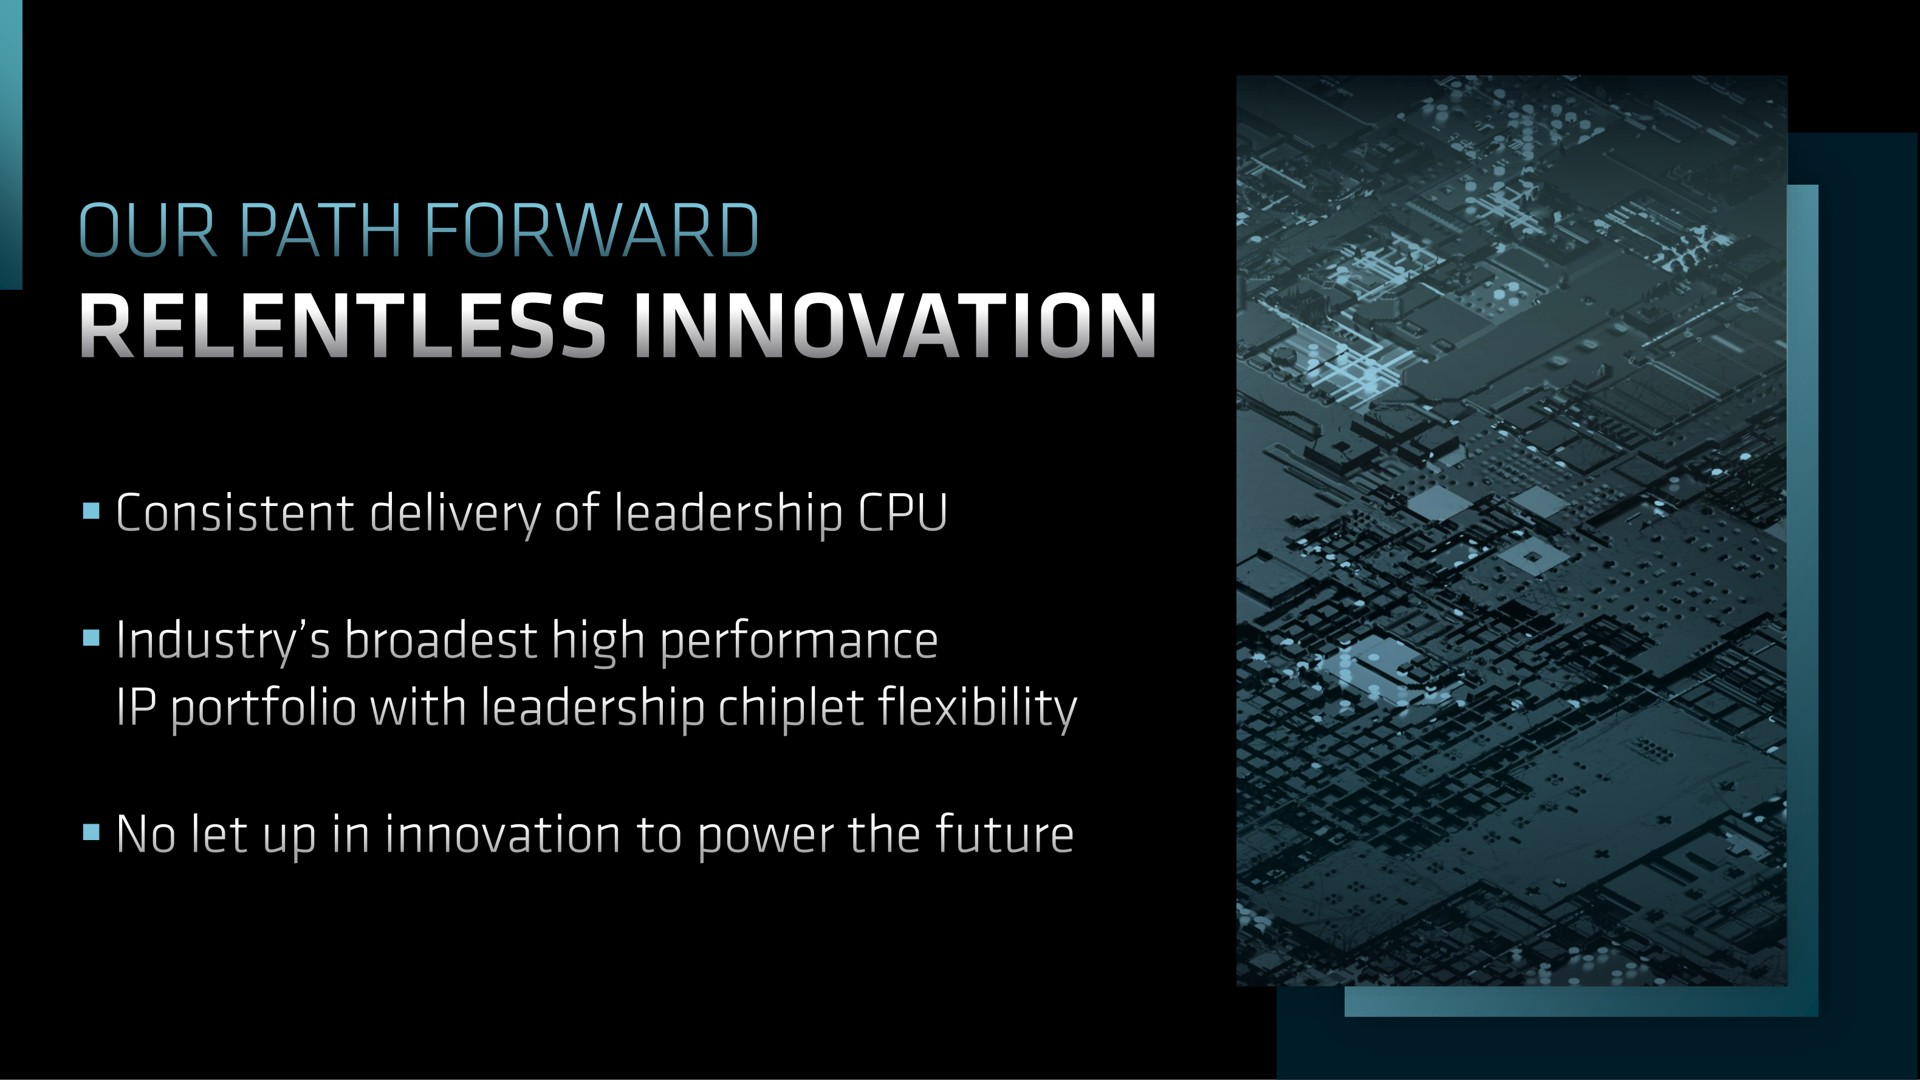 our path forward consistent delivery of leadership industry high performance portfolio with leadership chiplet flexibility no let up in innovation to power the future | AMD